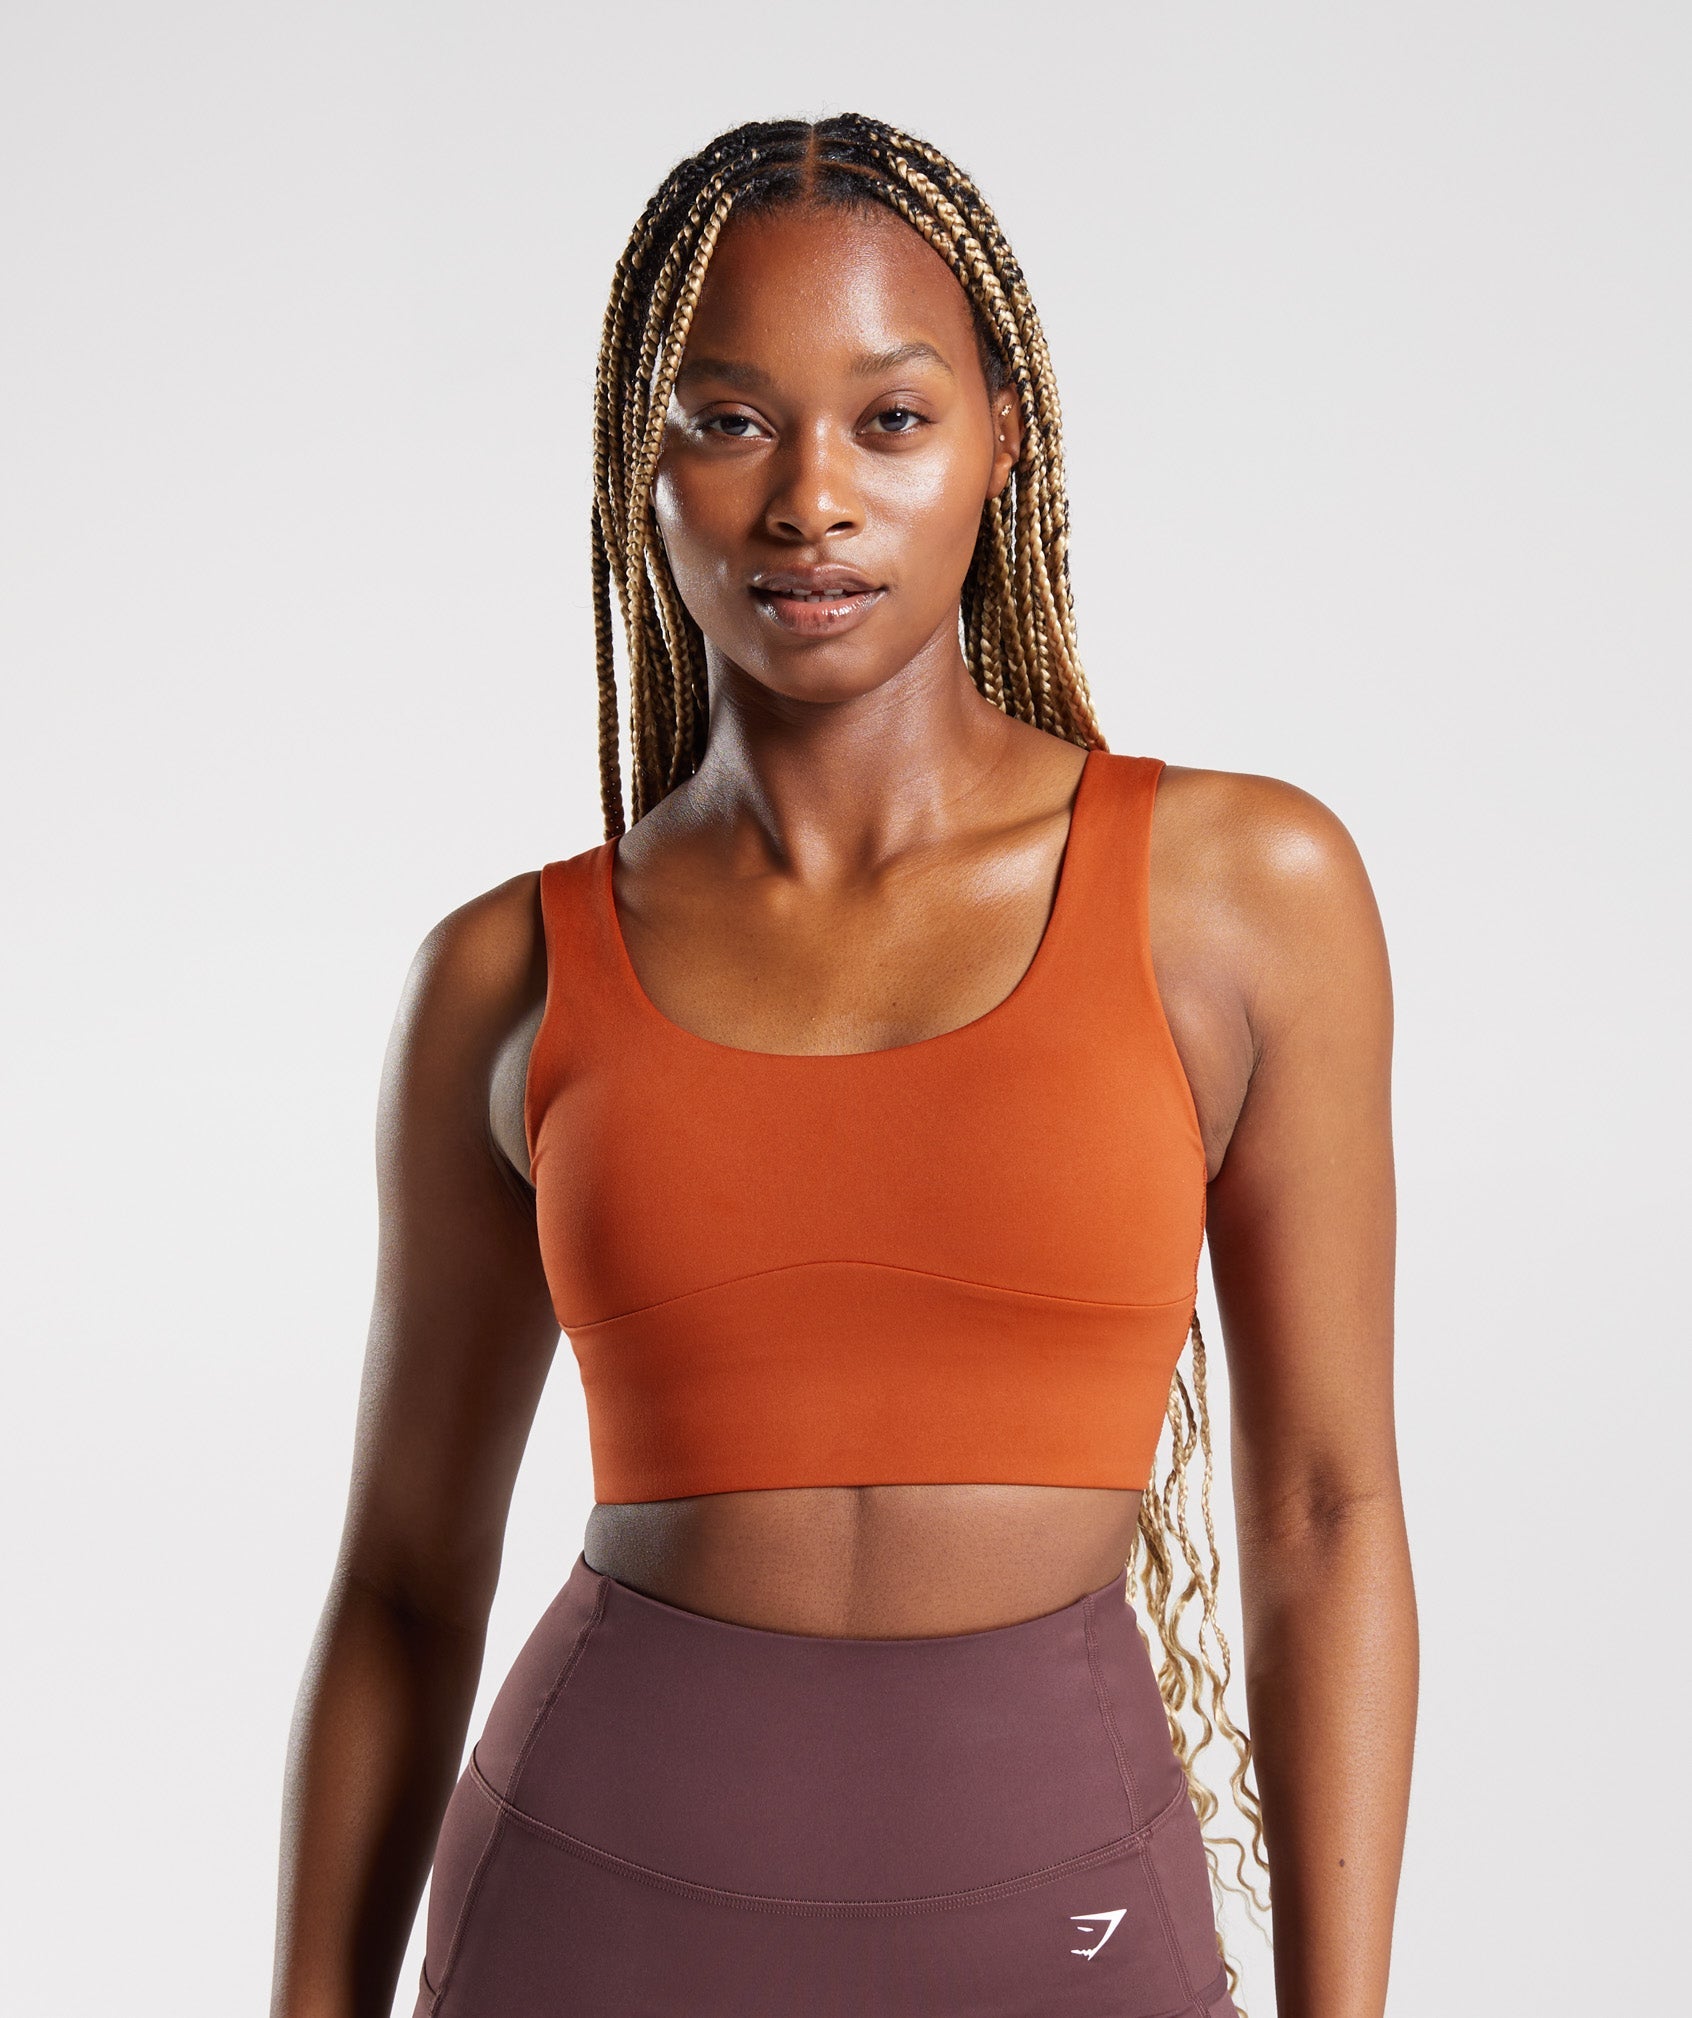 Brick Red-L) Extreme High Support Sports Bra 